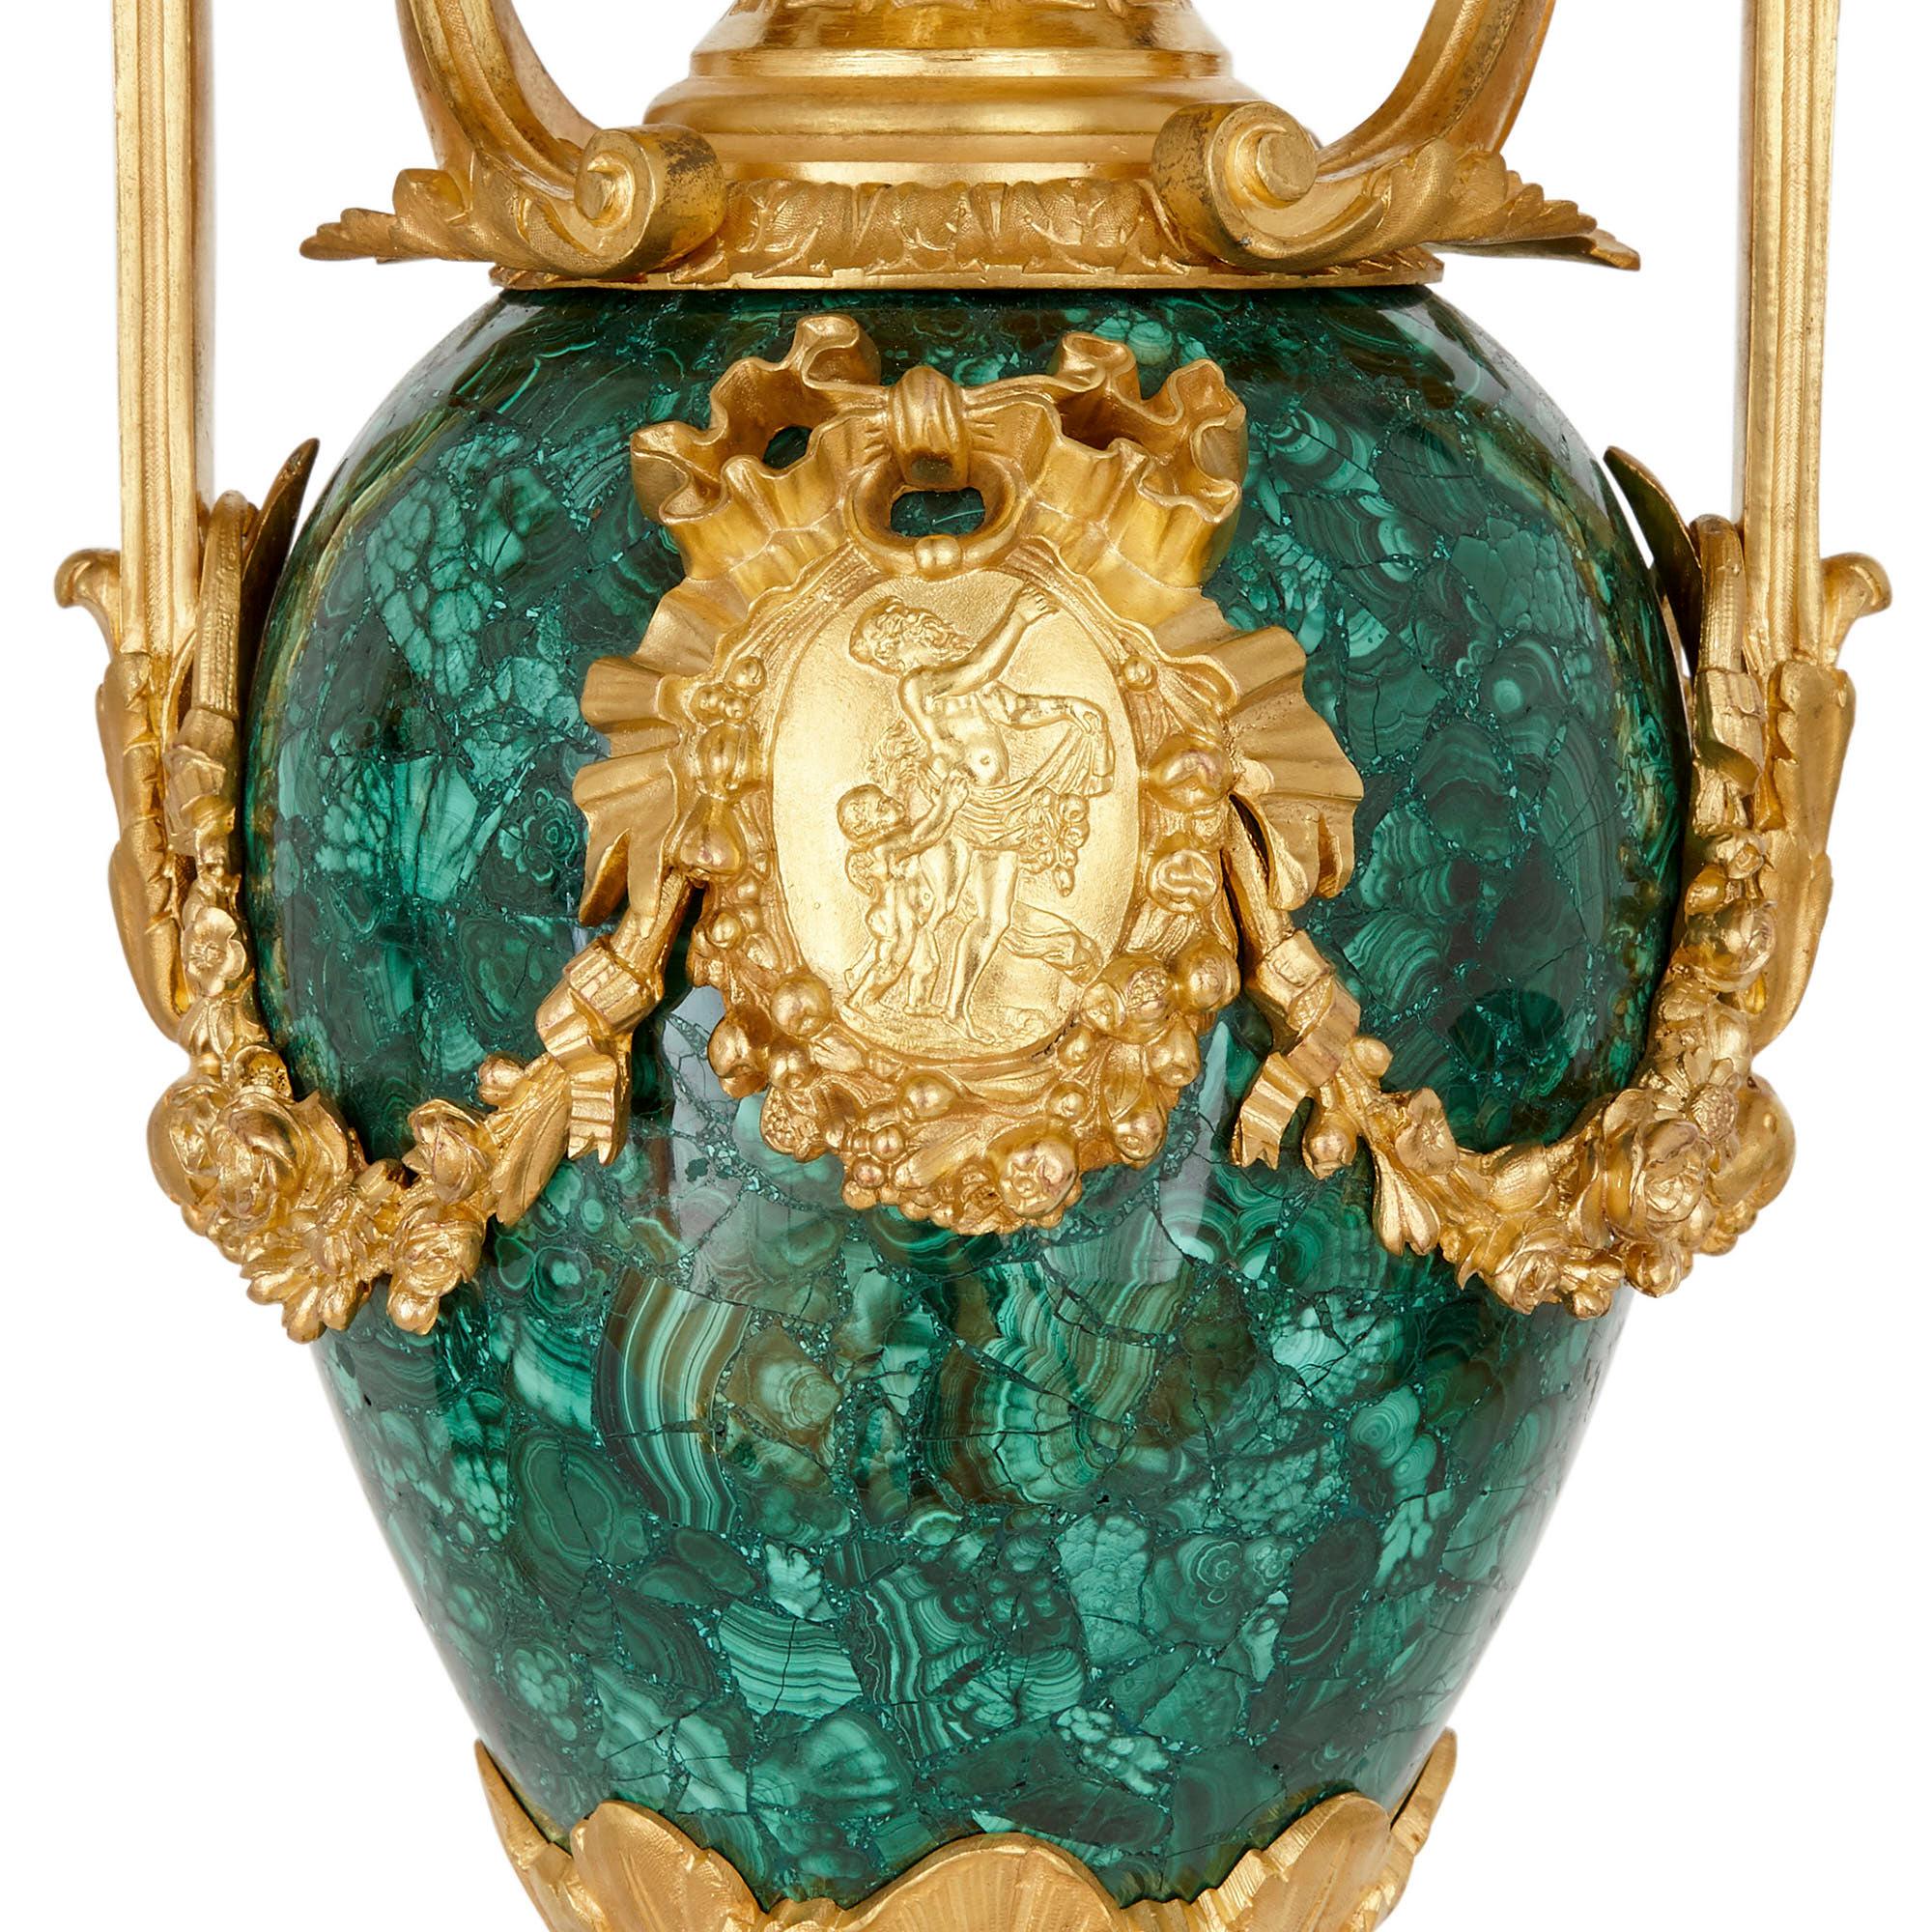 19th Century Napoleon III Period Neoclassical Malachite and Gilt Bronze Clock Set by Picard For Sale